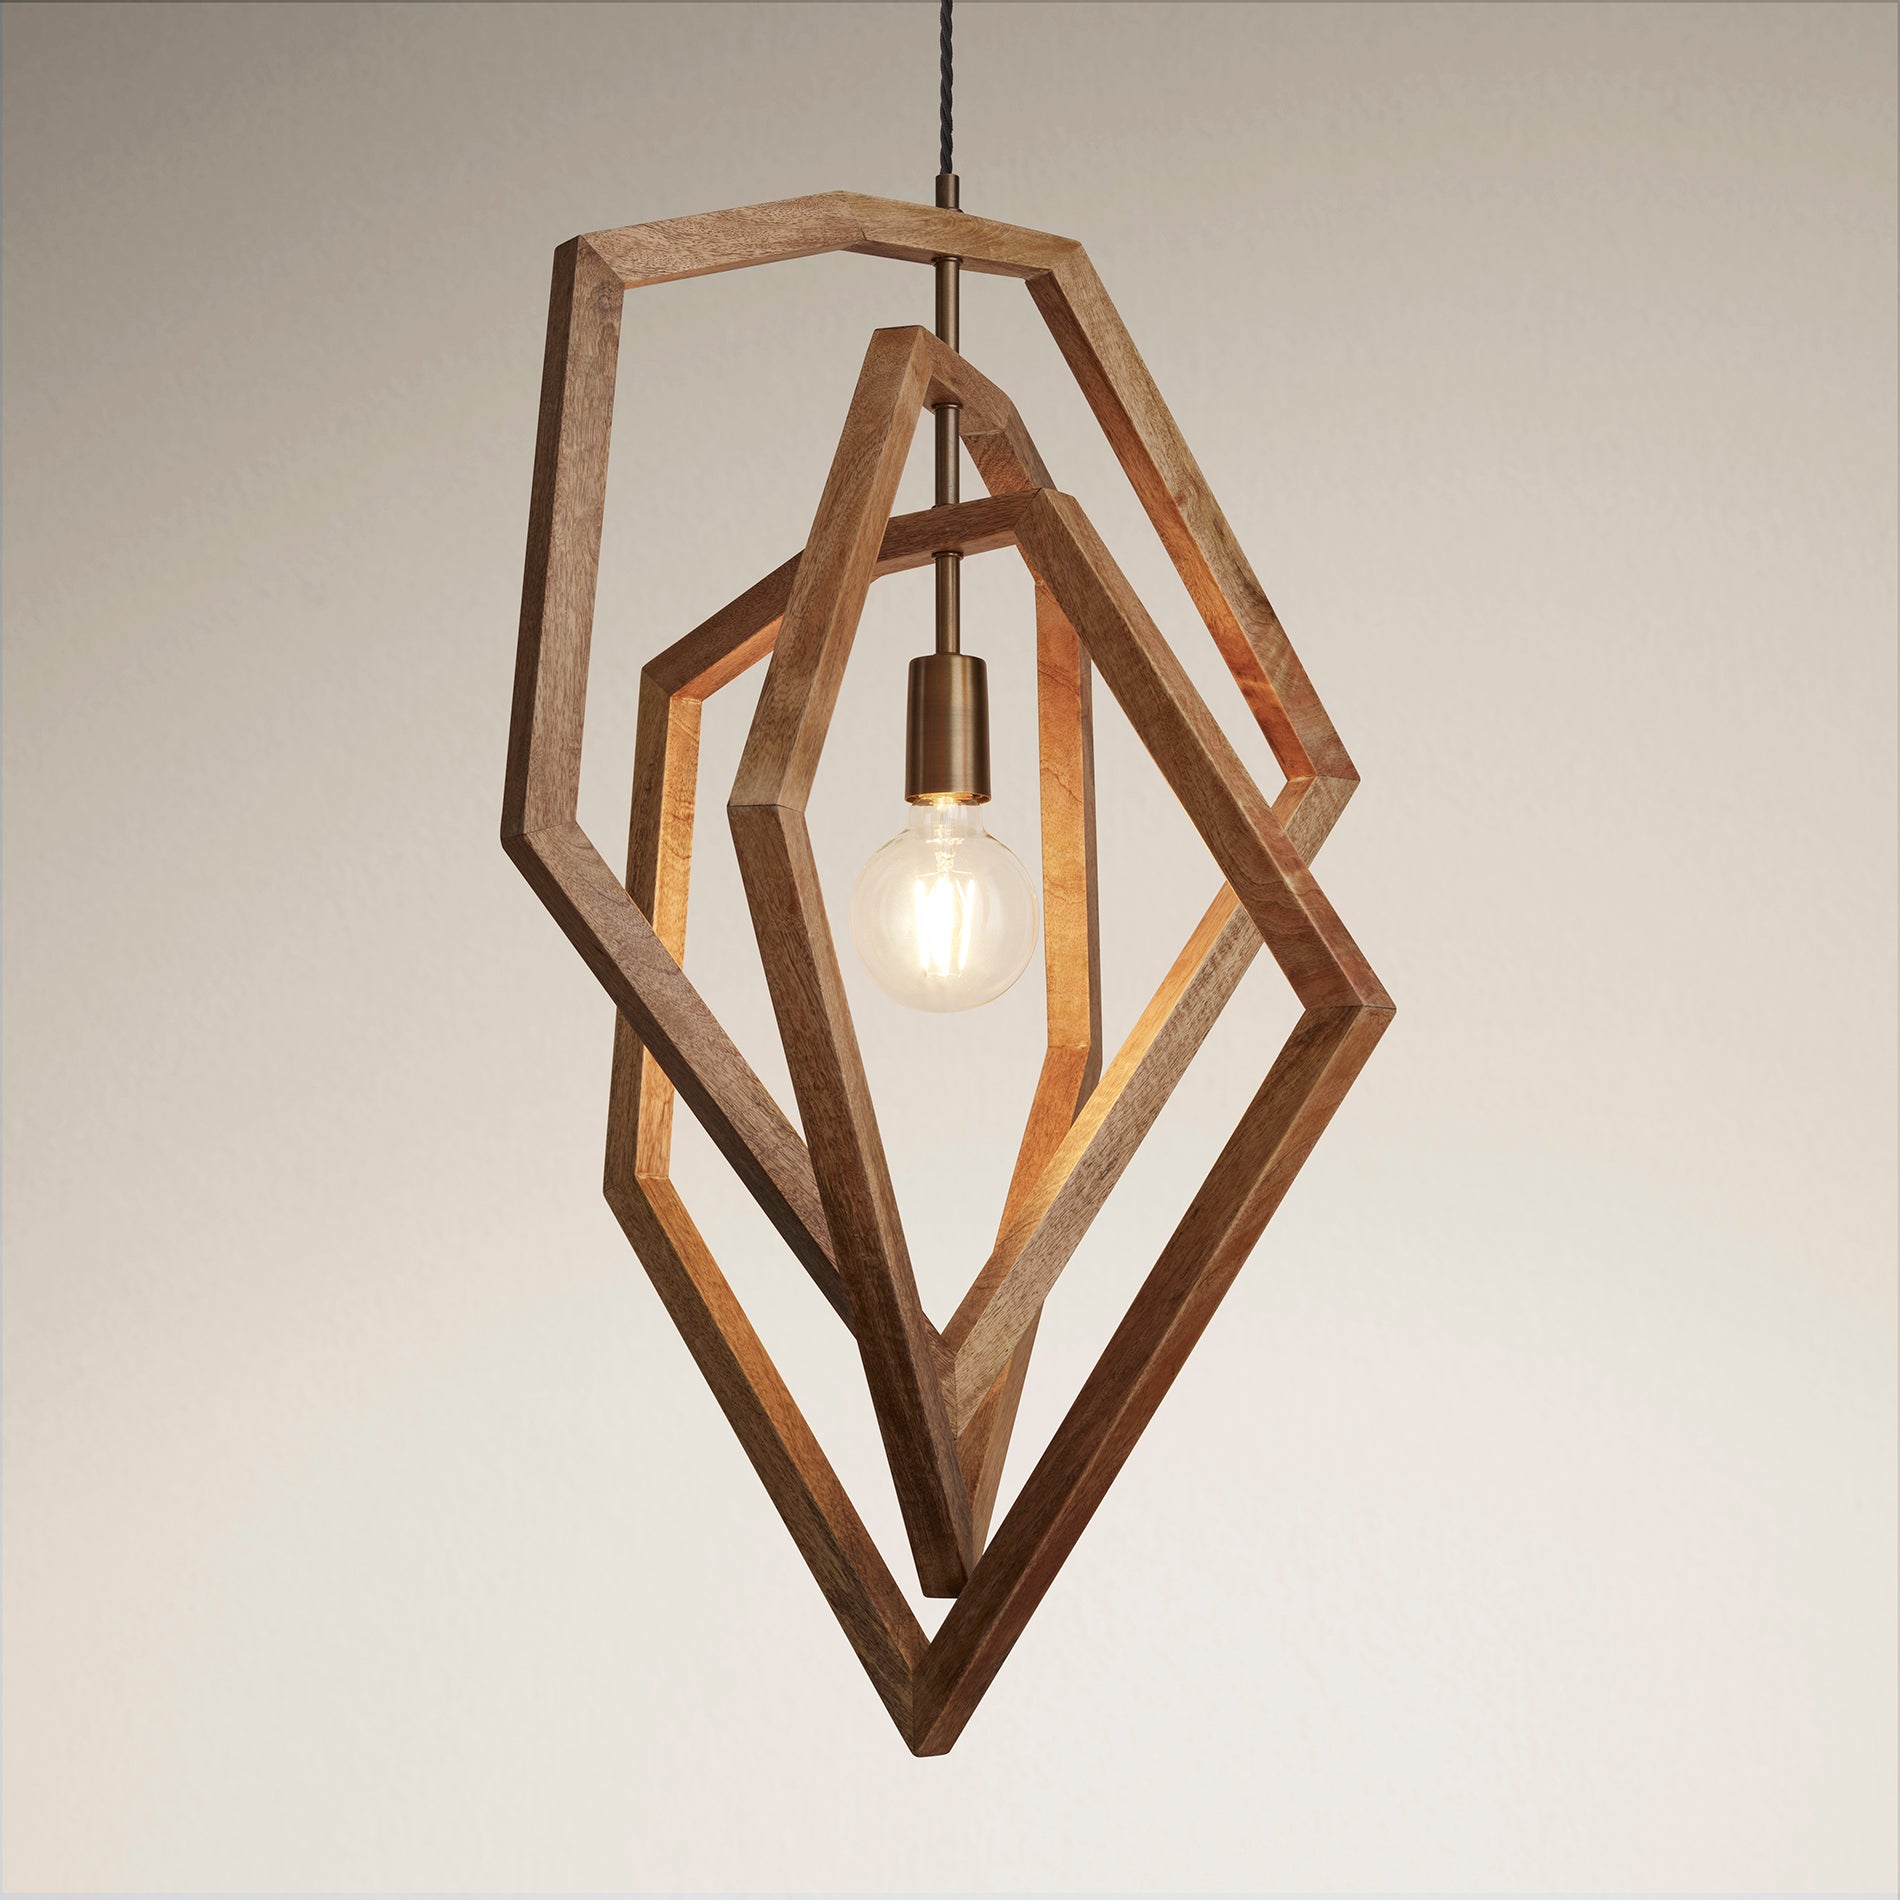 Wooden Geometric Ceiling Pendant Light - 20 inch - Polygon - Natural